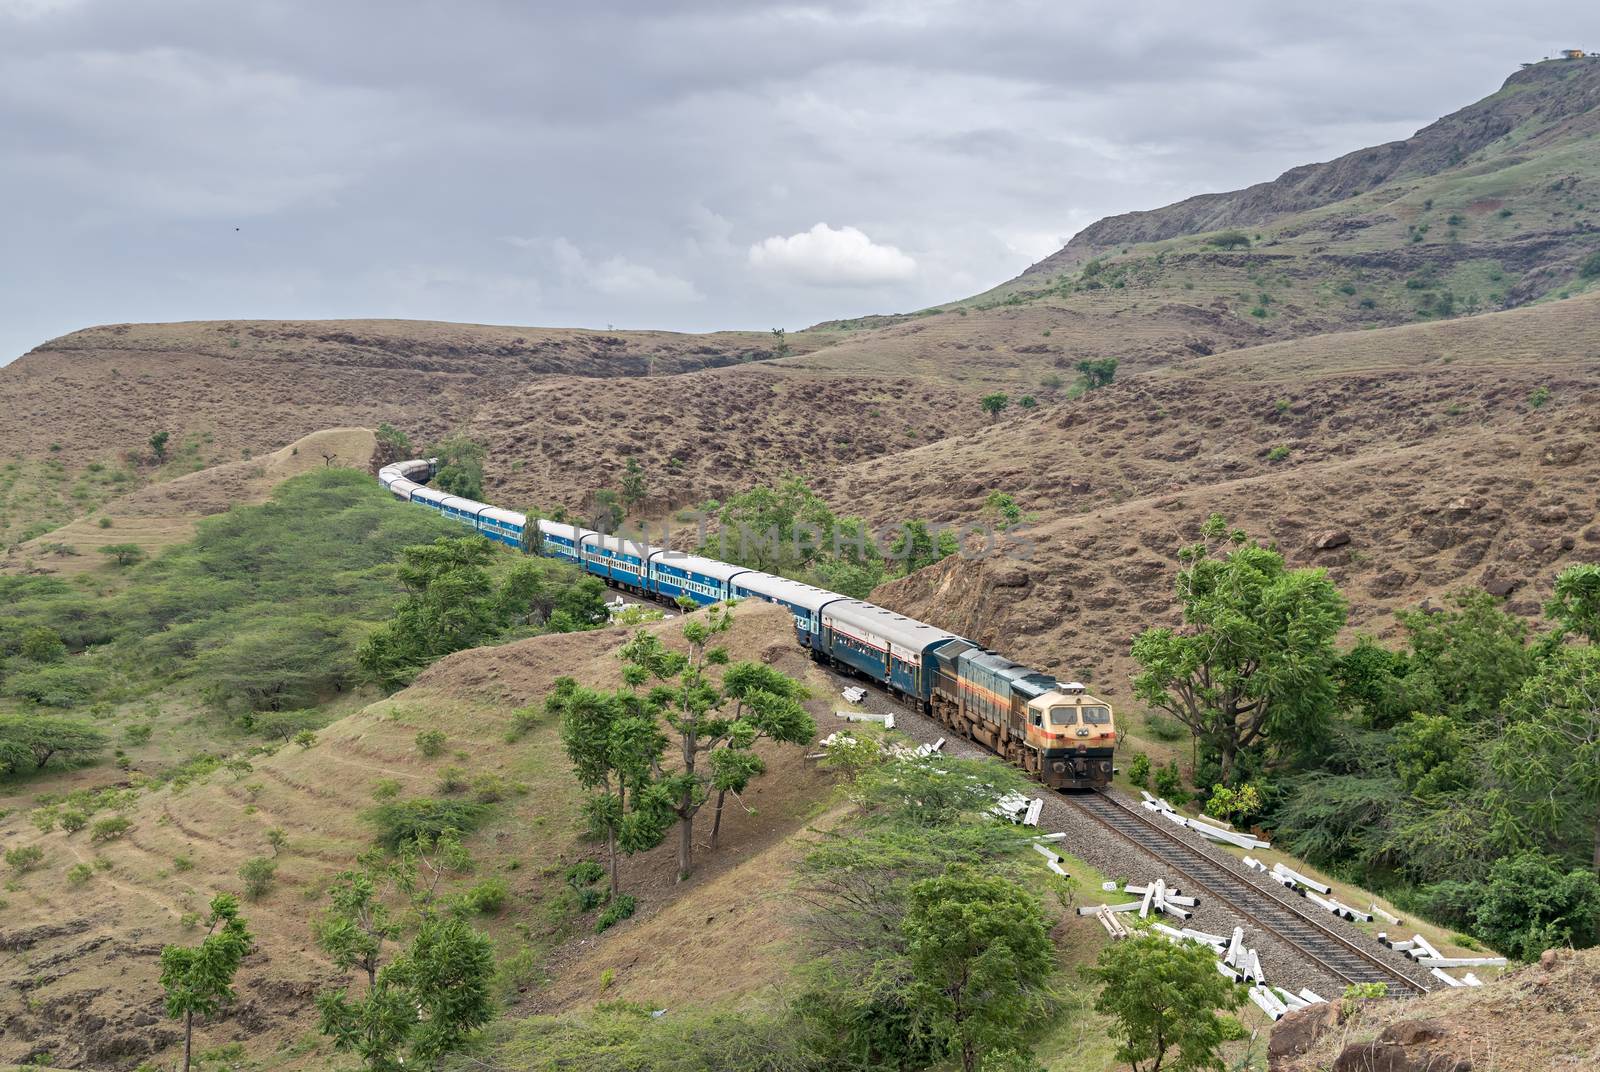 Train coming out of a hill cutting with background of mountains and clouds. by lalam